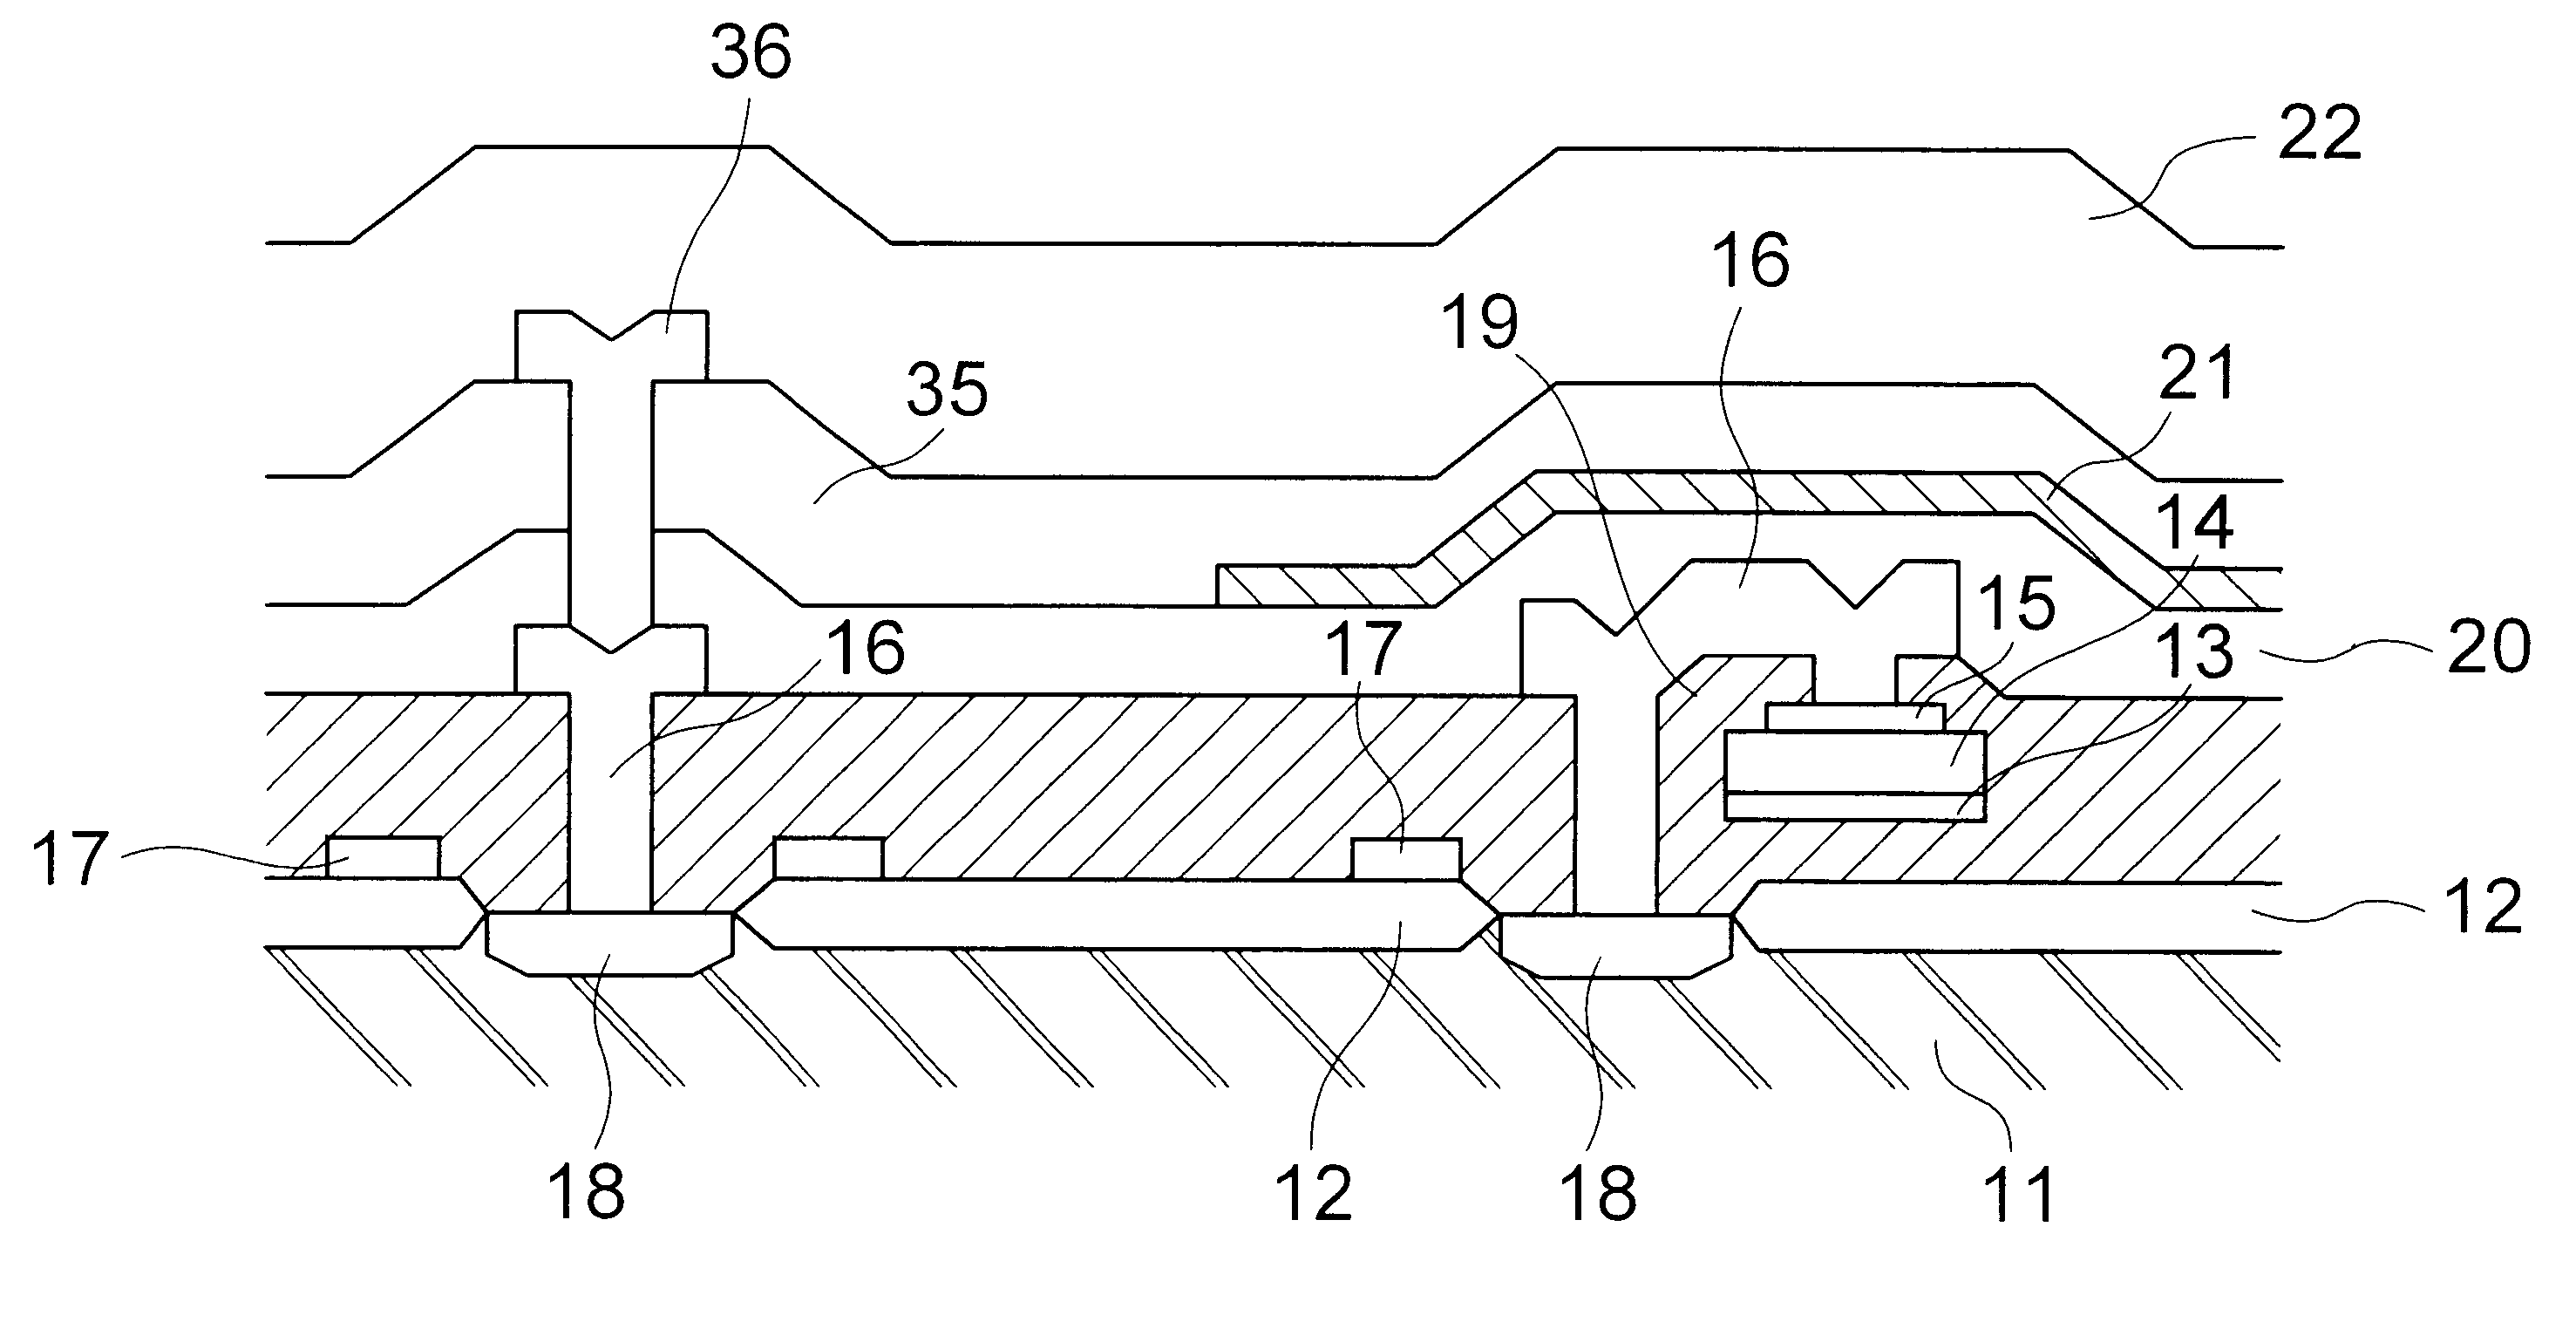 Ferroelectric memory device having a protective layer